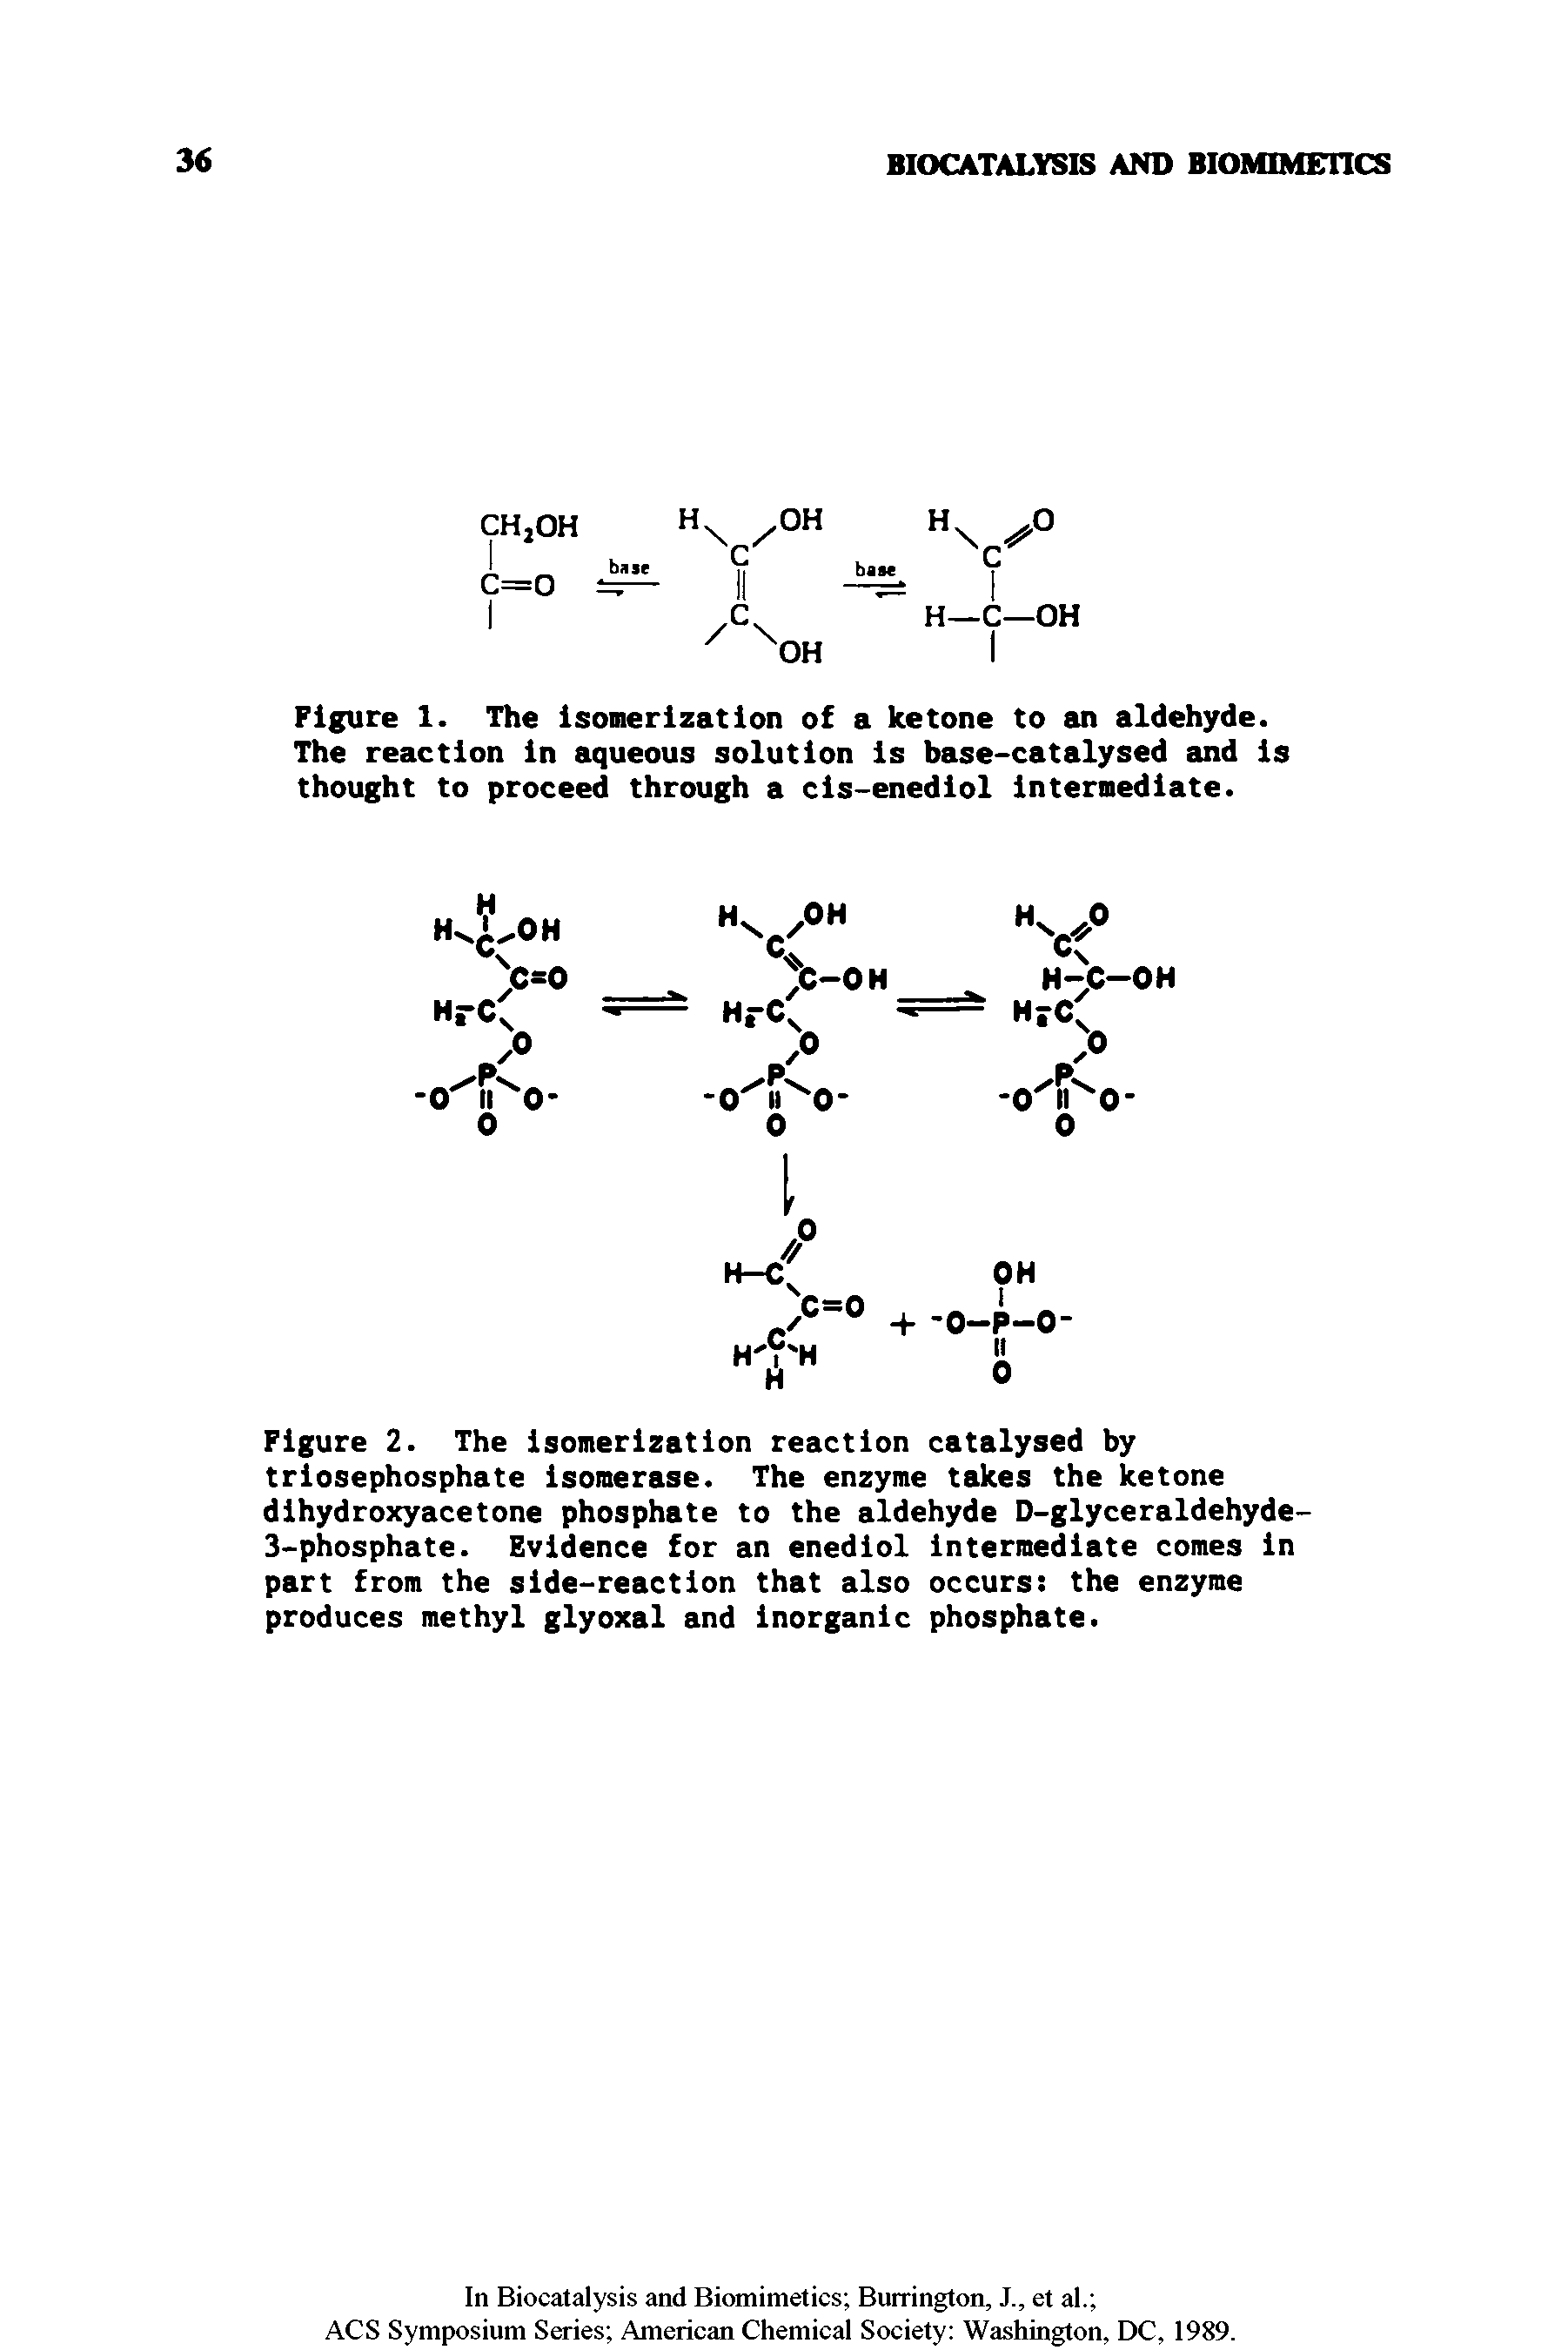 Figure 2. The isomerization reaction catalysed by triosephosphate isomerase. The enzyme takes the ketone dihydroxyacetone phosphate to the aldehyde D-glyceraldehyde-3-phosphate. Evidence for an enediol intermediate comes in part from the side-reaction that also occurs the enzyme produces methyl glyoxal and inorganic phosphate.